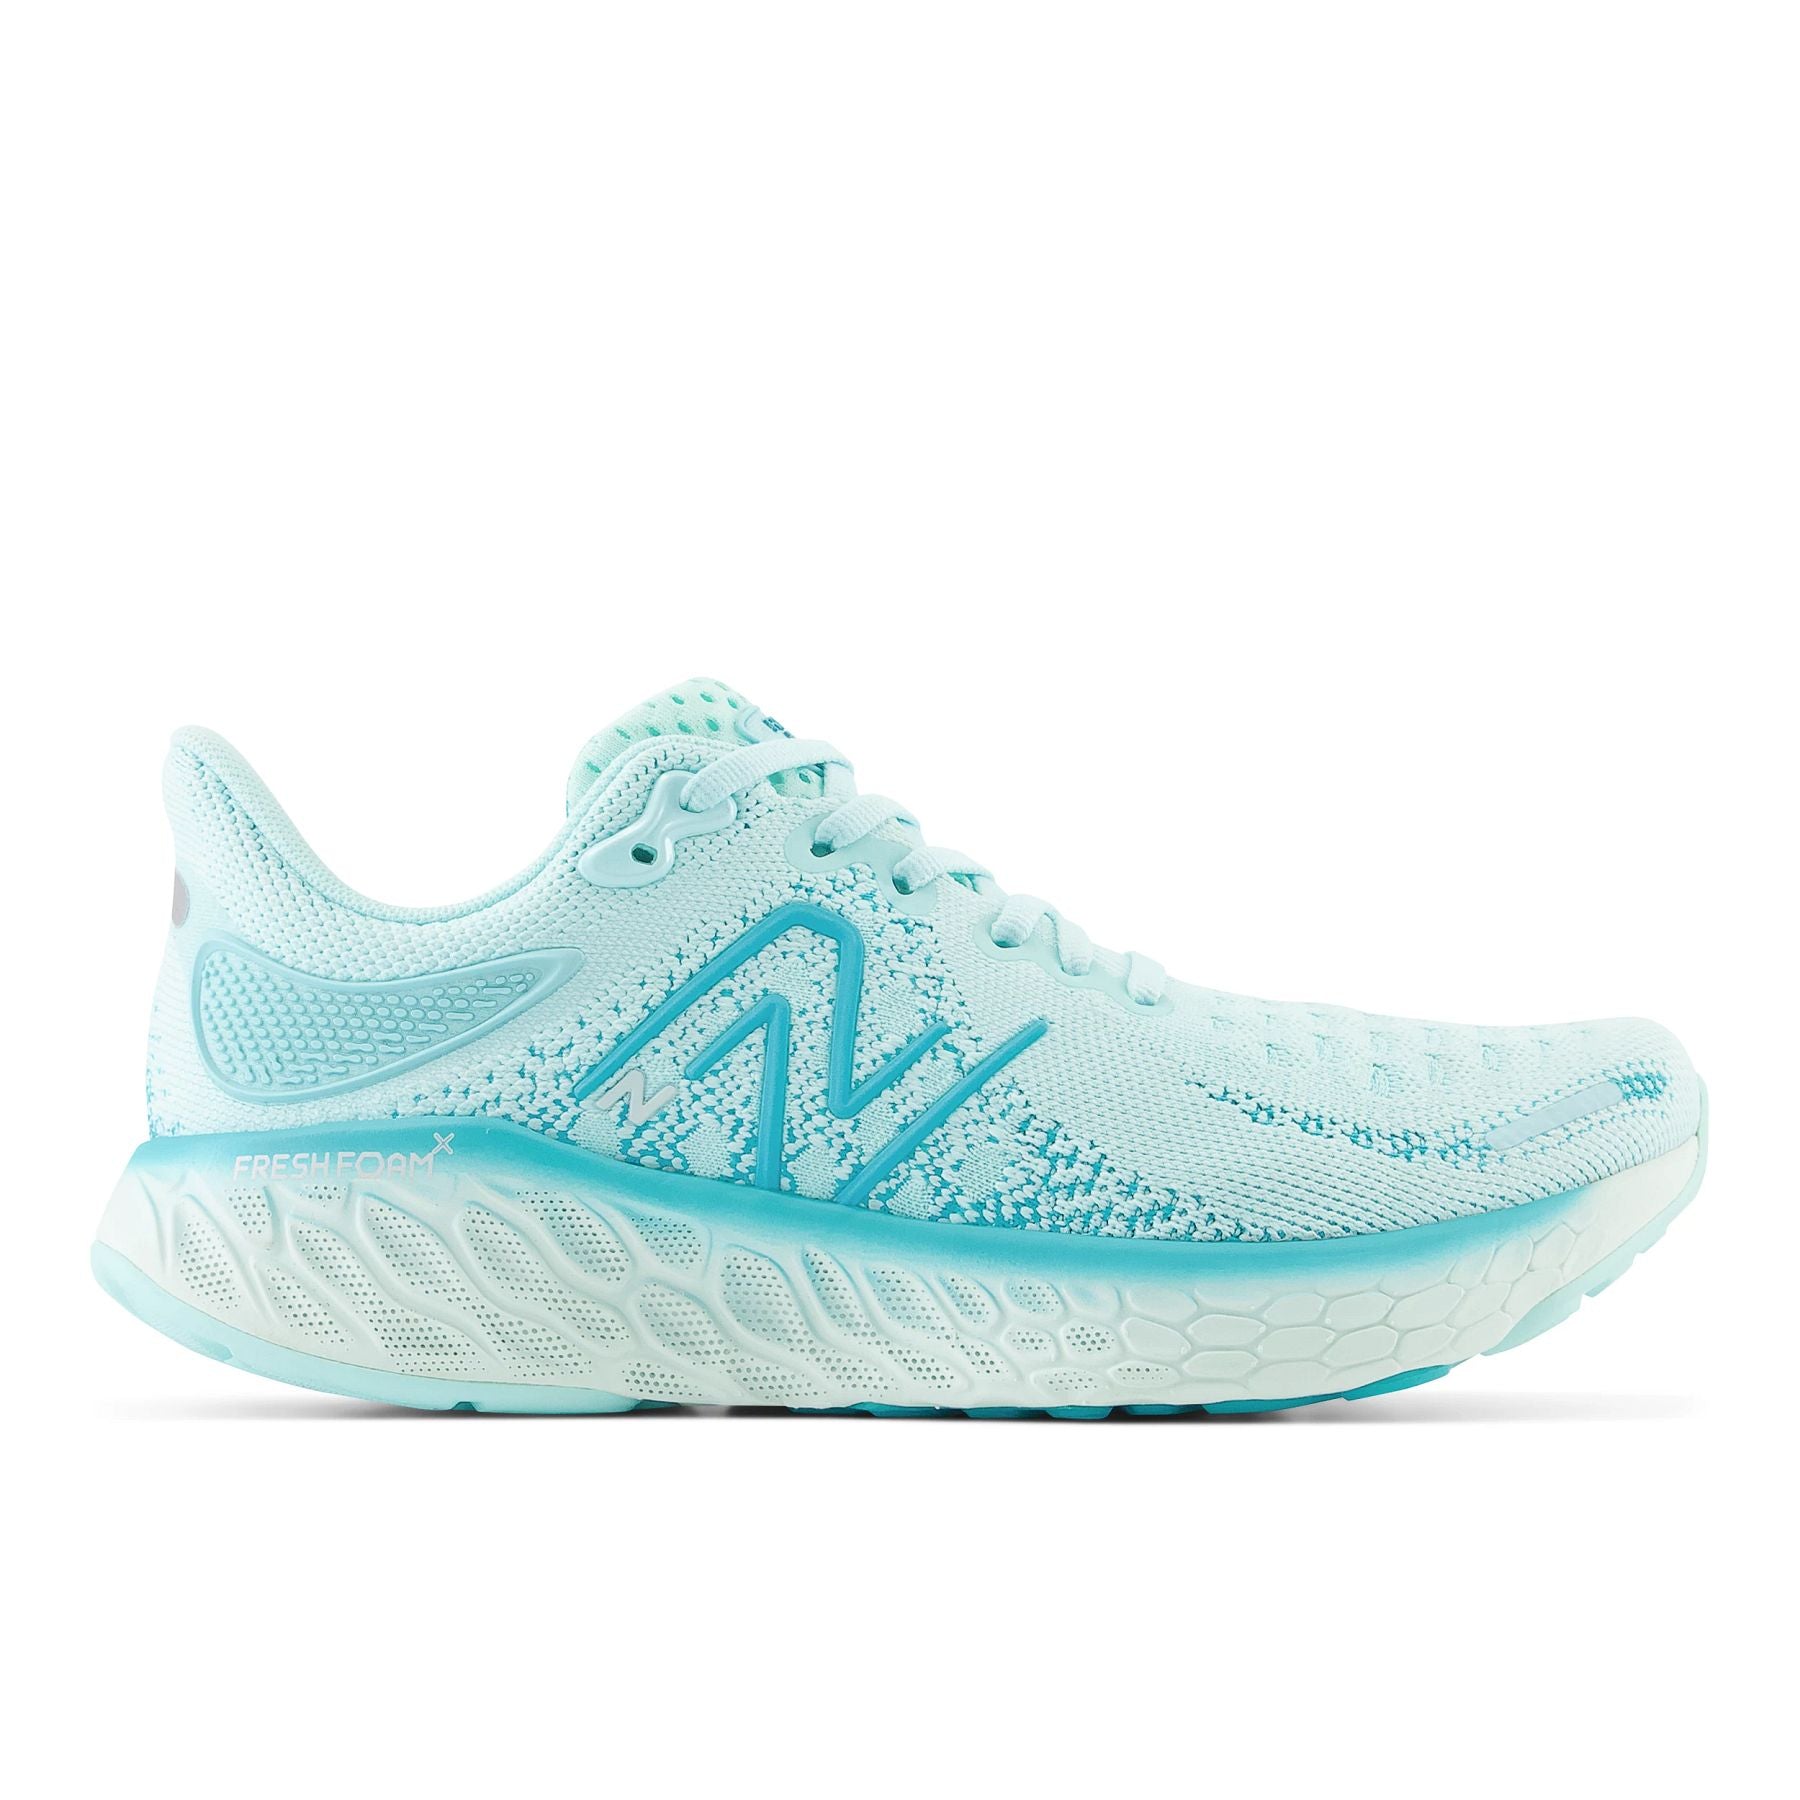 Lateral view of the Women's 1080 V12 by New Balance in the color Bright Cyan/Virtual Blue